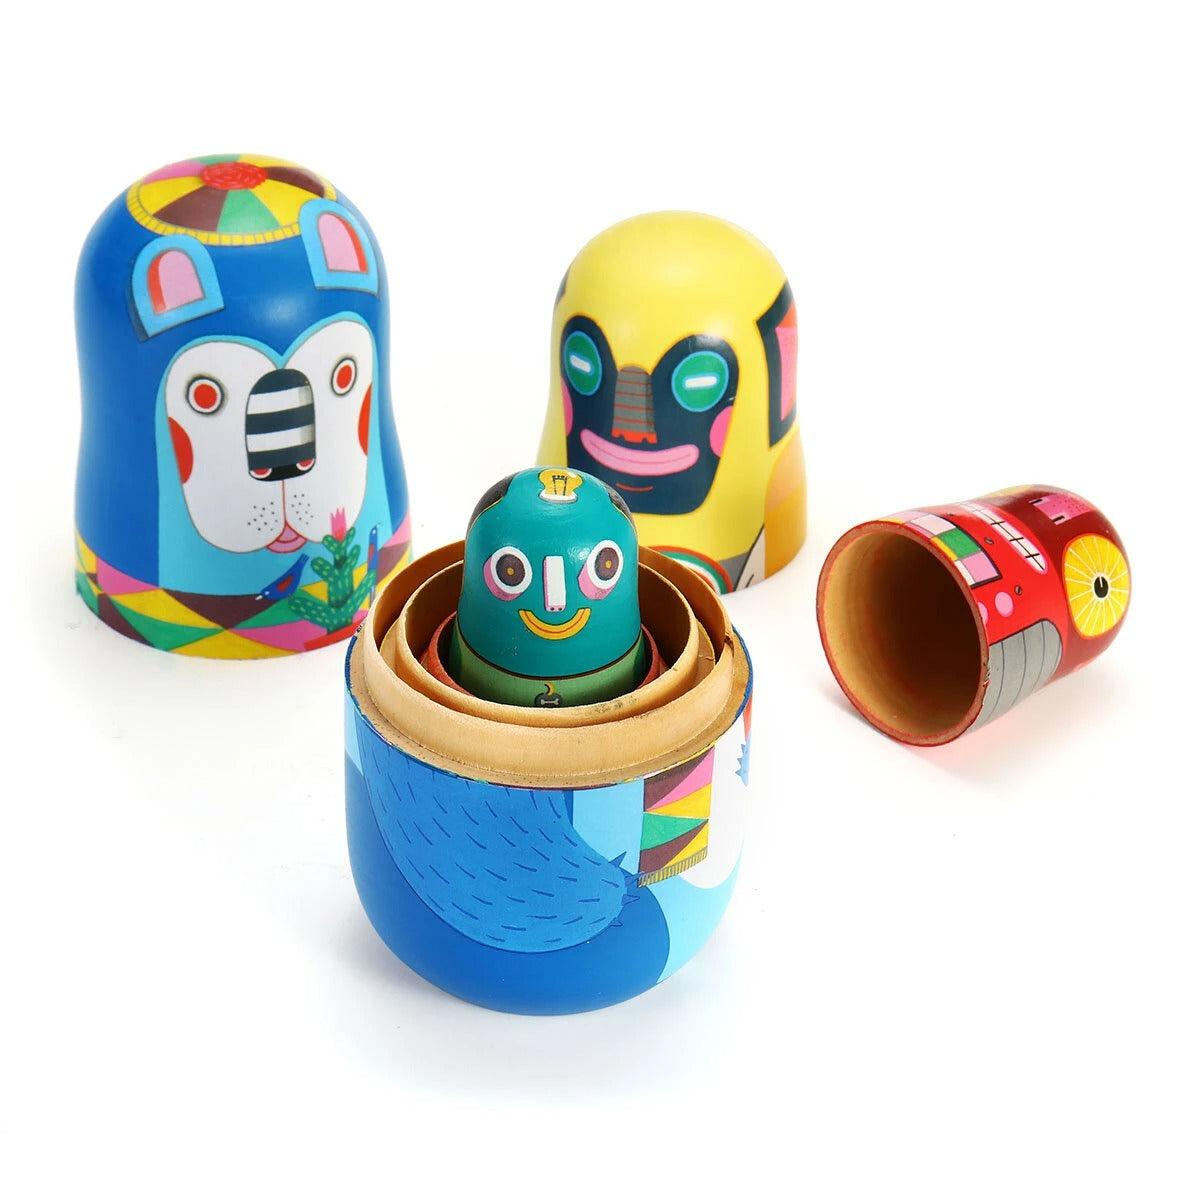 Russian Wooden Nesting Doll For Christmas